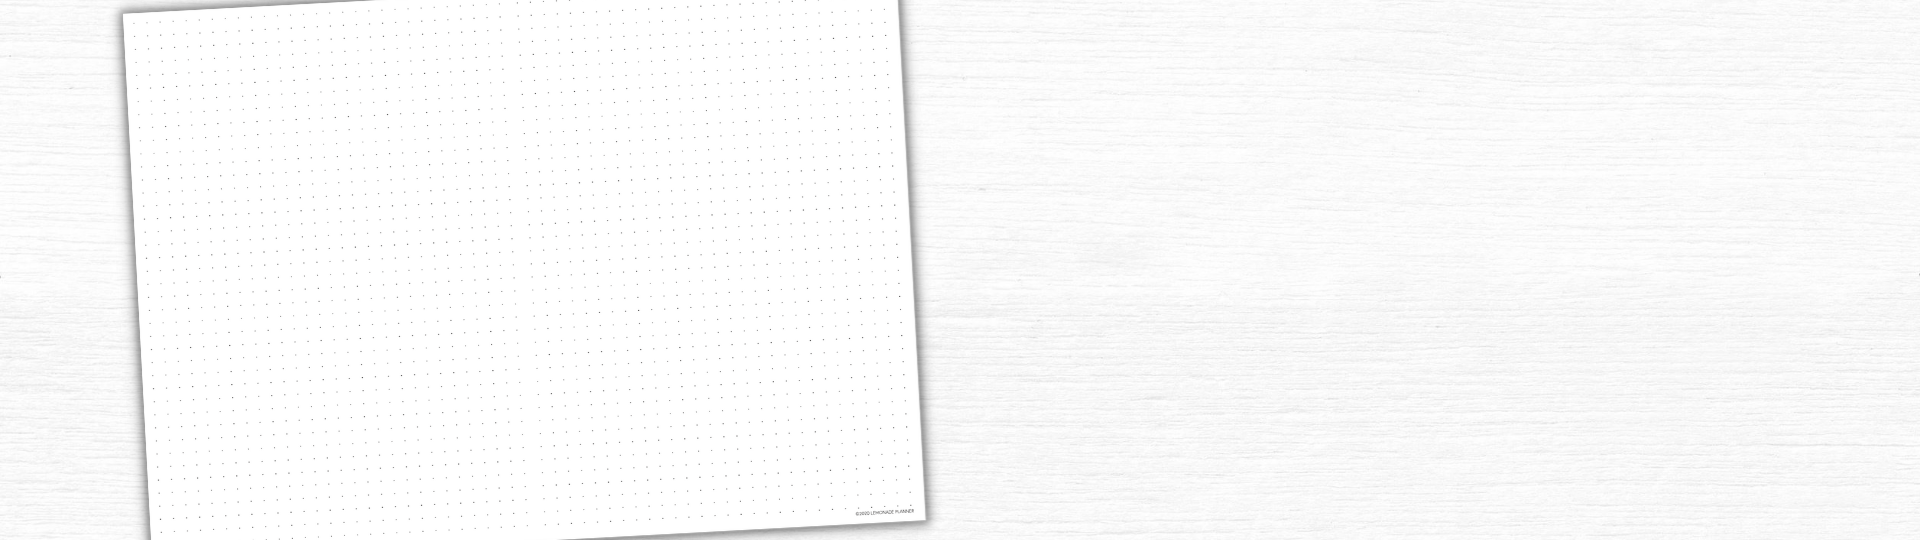 Dotted Grid Download